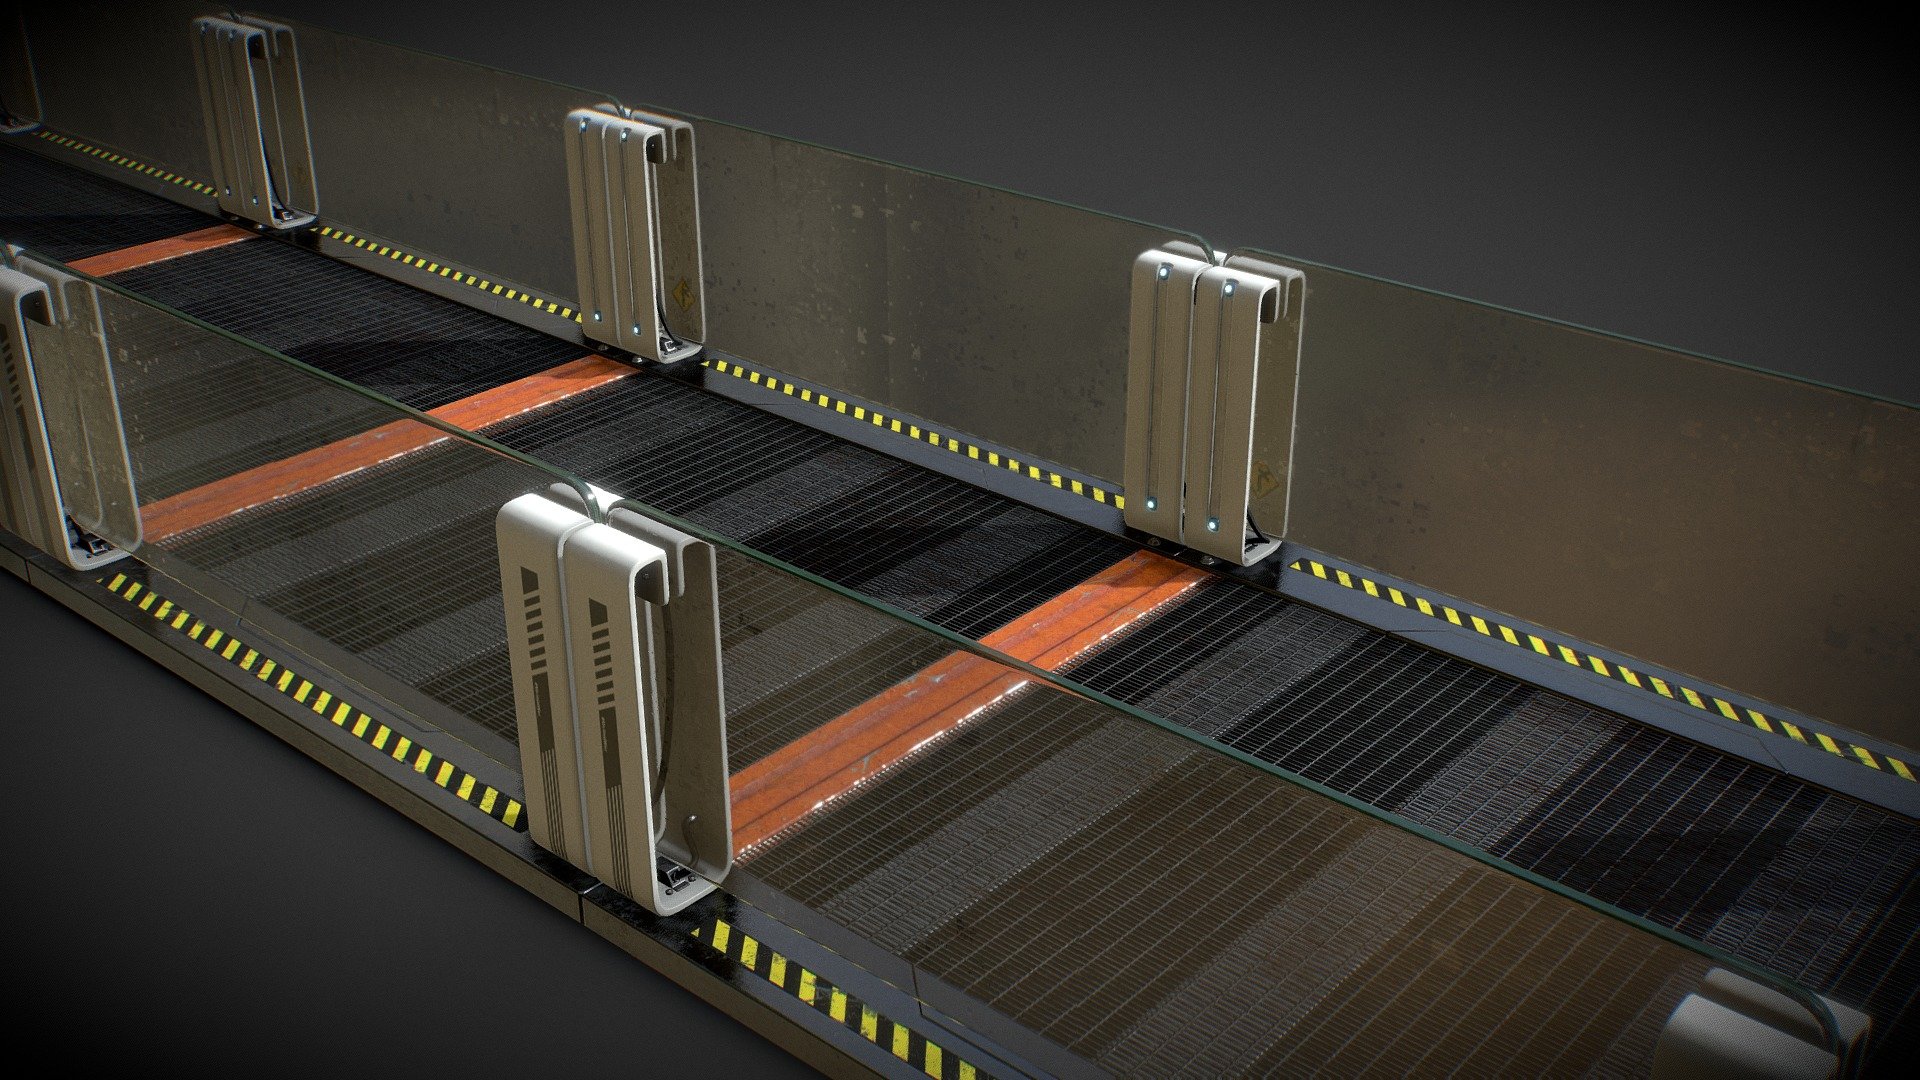 Modular Walking Platform  -Game Ready- PBR

This product include 4 Mesh (Holder with glass, Main Walking Platform, Platform Connector, Mesh Combine)


No copyright infringement, all the branding/ logo in the assets is pure fiction
Assets is real-world scale. Check screenshot for Asset size
Triangle count of this asset is 13408 to 994
Texture size 2048 to 1024
Including RMA (Roughness, Metaliness, AO) map for optimization
The best transform snapping is 300cm
Normal map format is DirectX (-Y)

Texture type-
* Albedo
* Normal
* Roughness
* Metalness
* AO
* RMA
* Opacity Map is packed in Albedo alpha channel 

File Format: Max 2021, 3ds, FBX, OBJ, PNG, TGA

This assets can be used for any project including game, movie, novel graphic, advertisement, personel project and etc. You may not resell or distribute any content of the asset - Modular Walking Platform  -Game Ready- PBR - Buy Royalty Free 3D model by RavenLoh 3d model